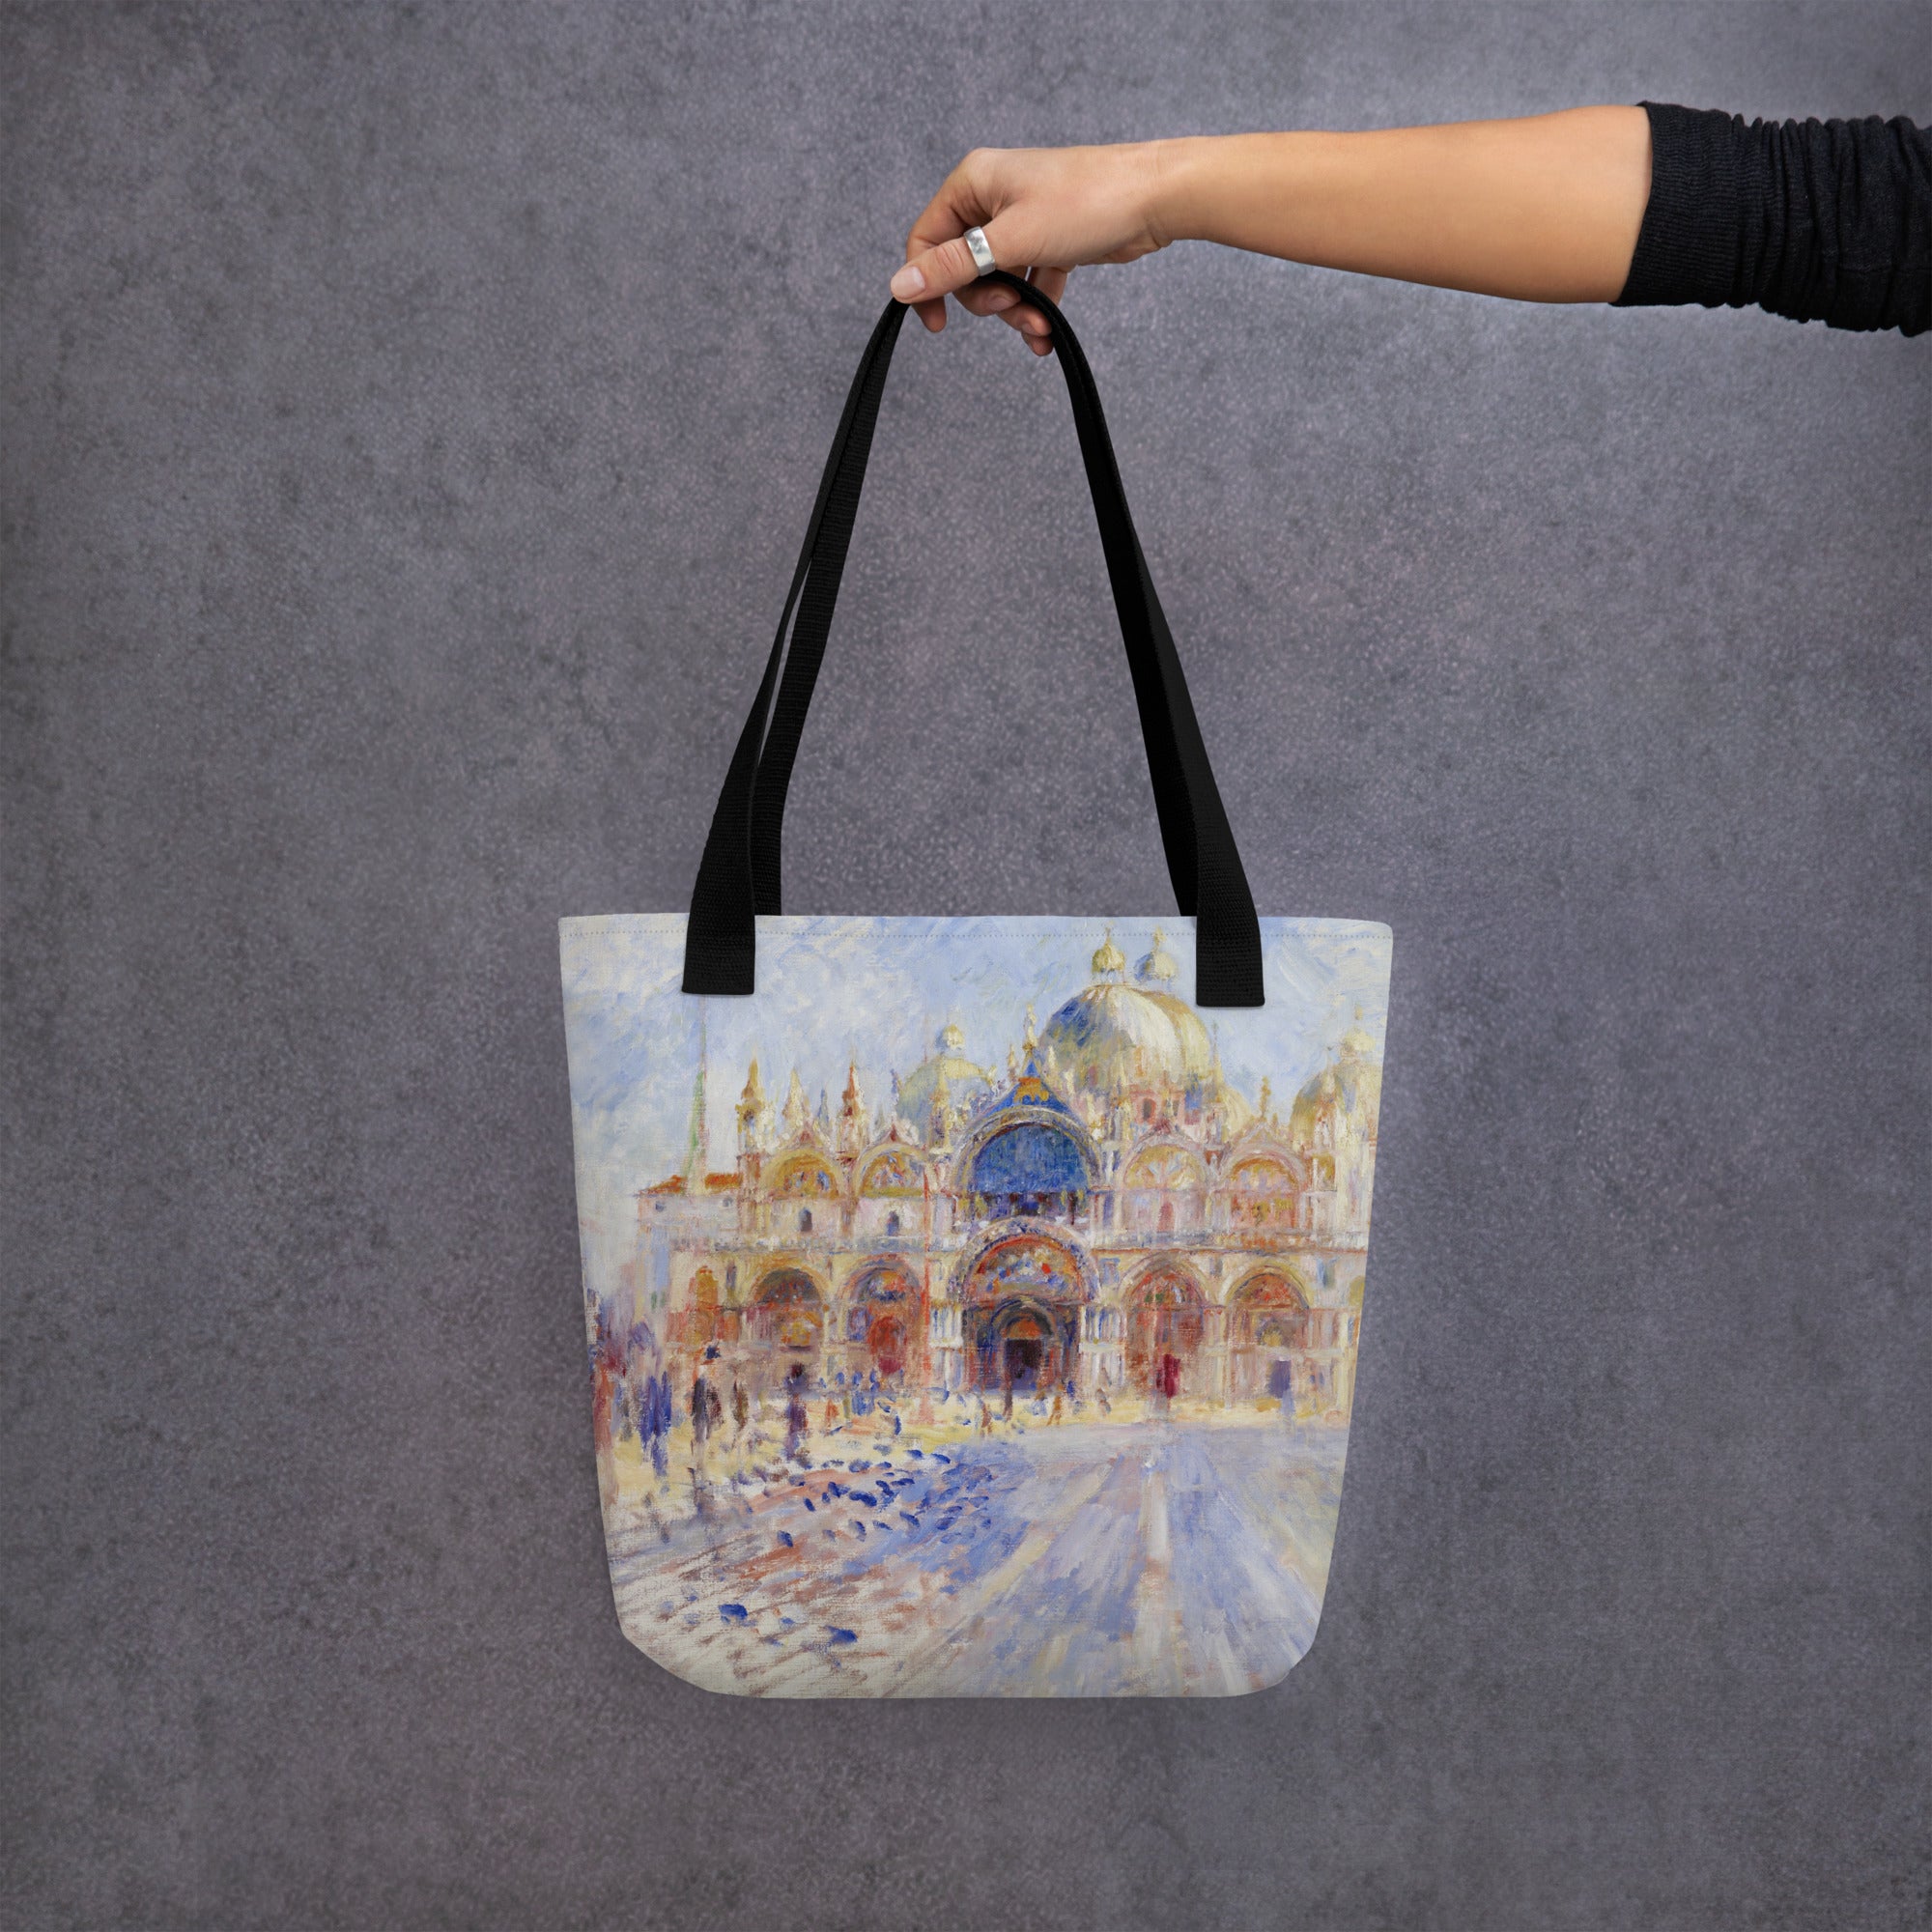 Pierre-Auguste Renoir 'The Piazza San Marco, Venice' Famous Painting Totebag | Allover Print Art Tote Bag